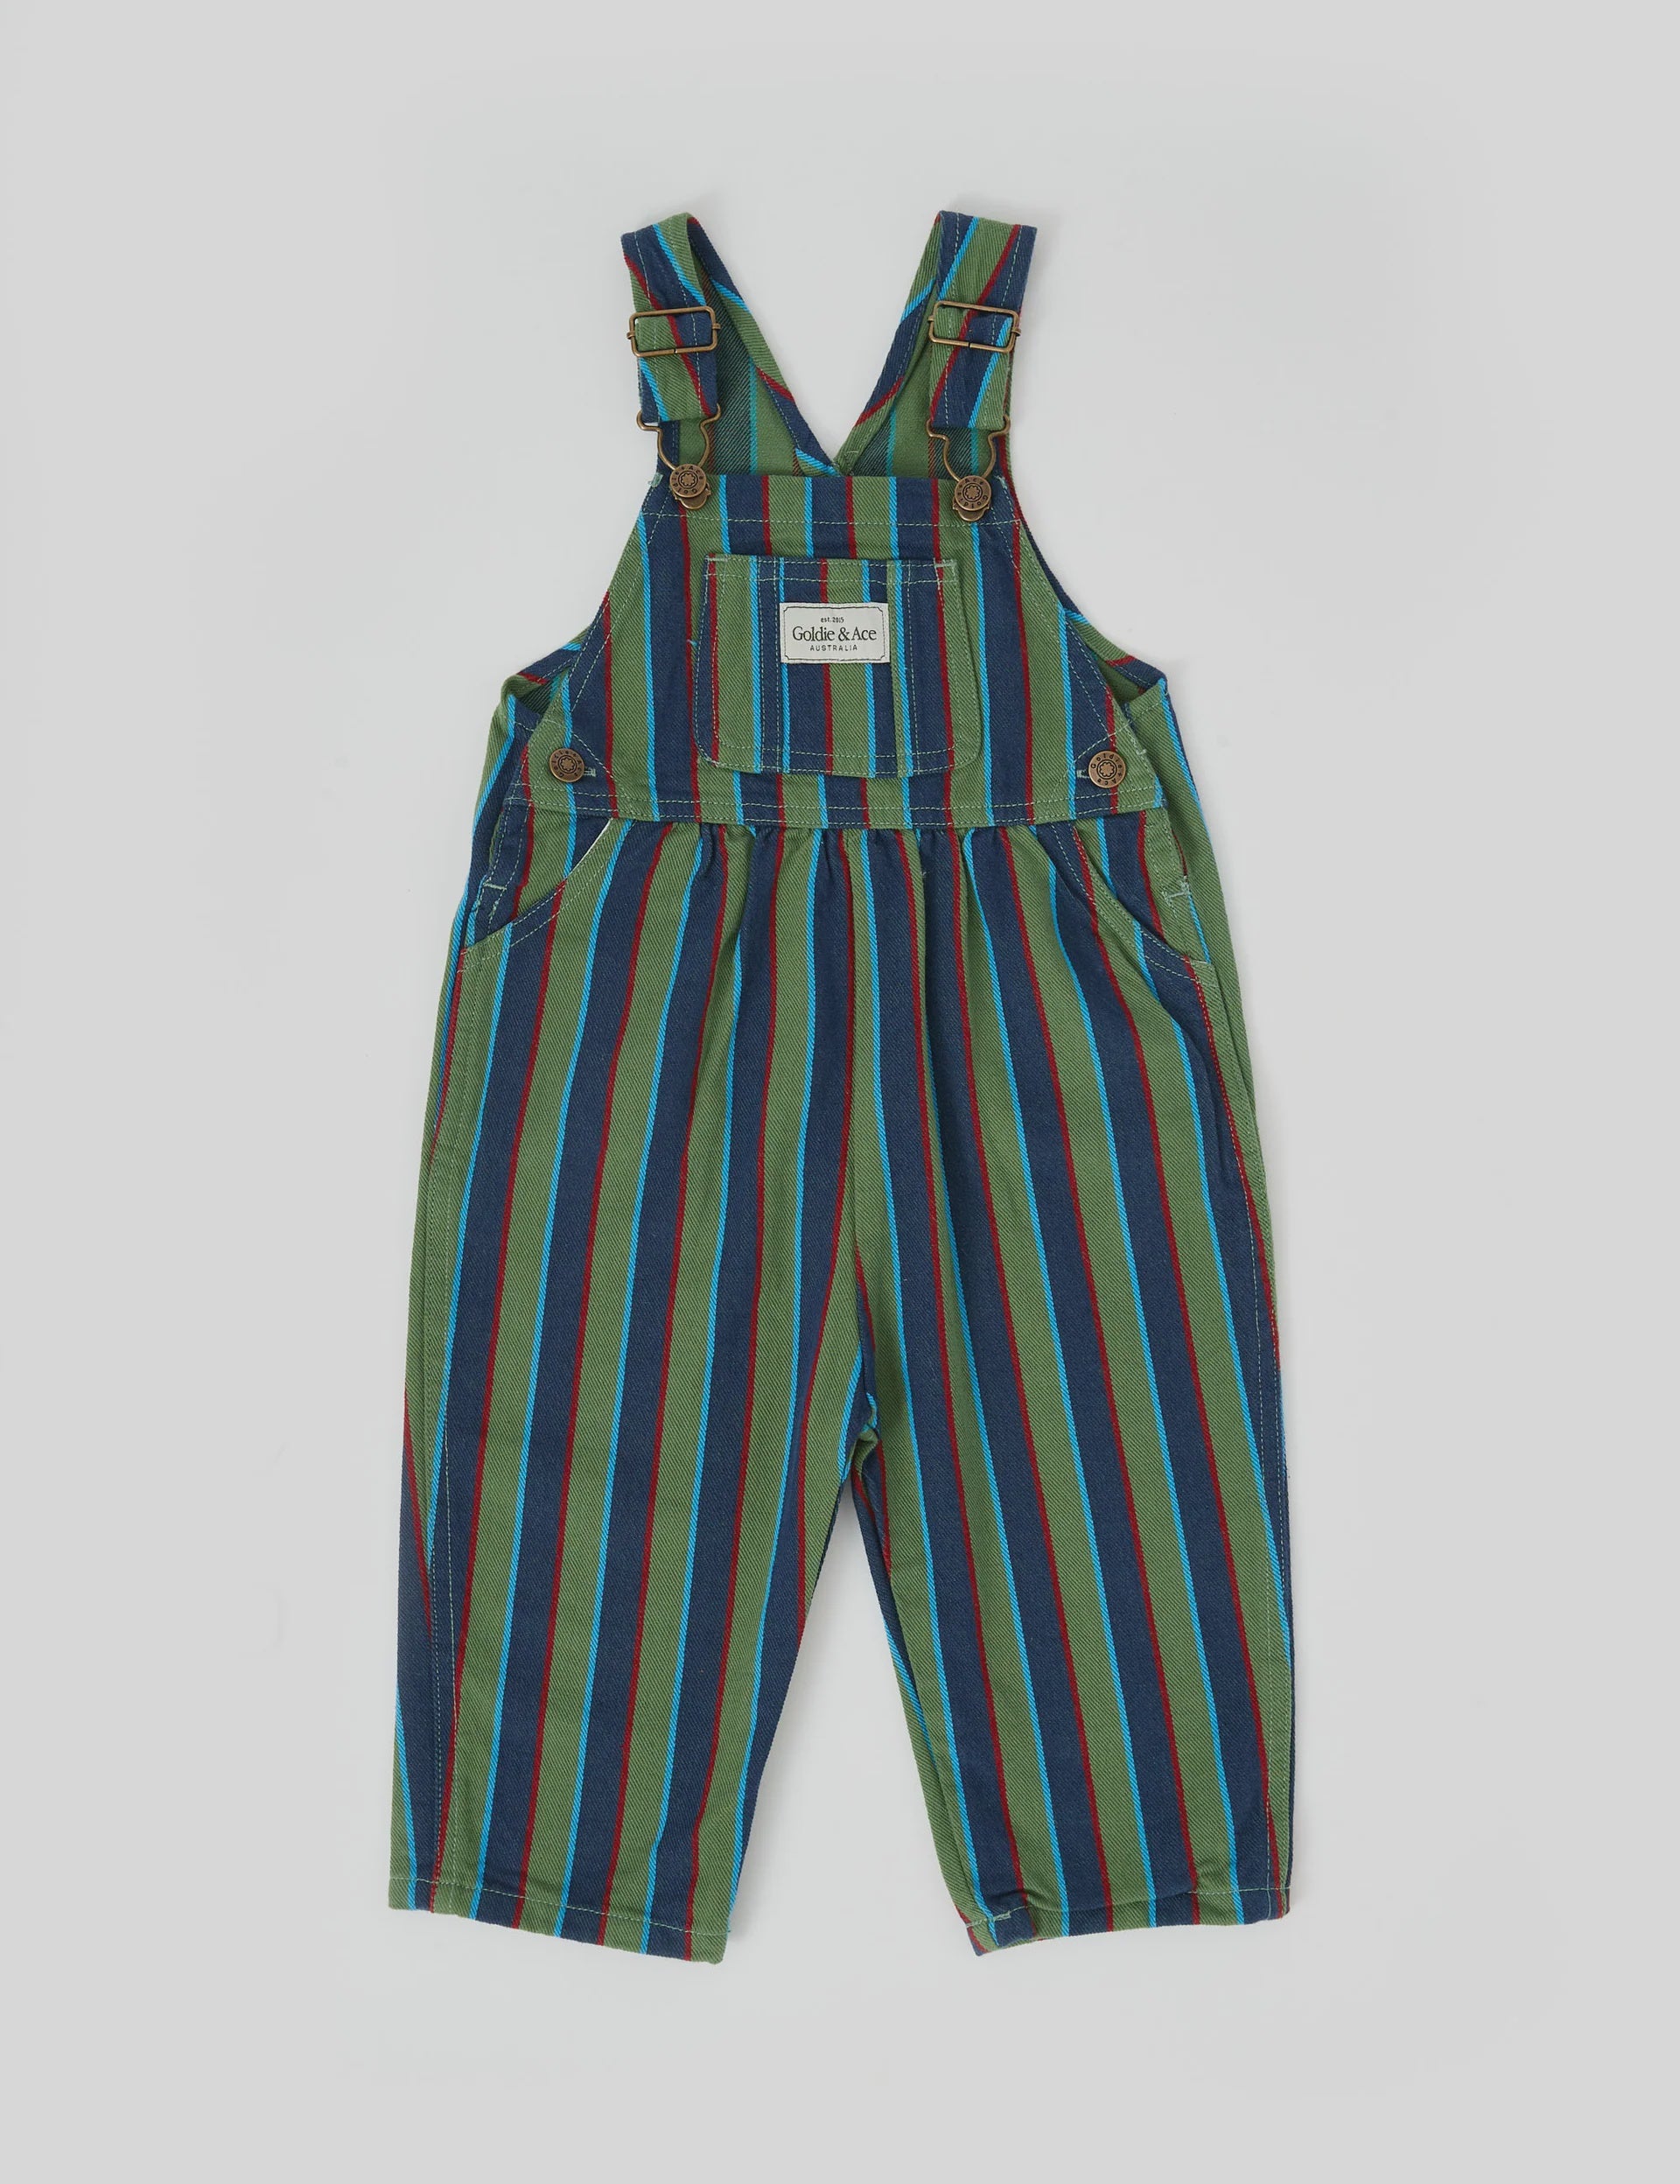 ACE TWILL OVERALLS HERITAGE STRIPE | Goldie and Ace